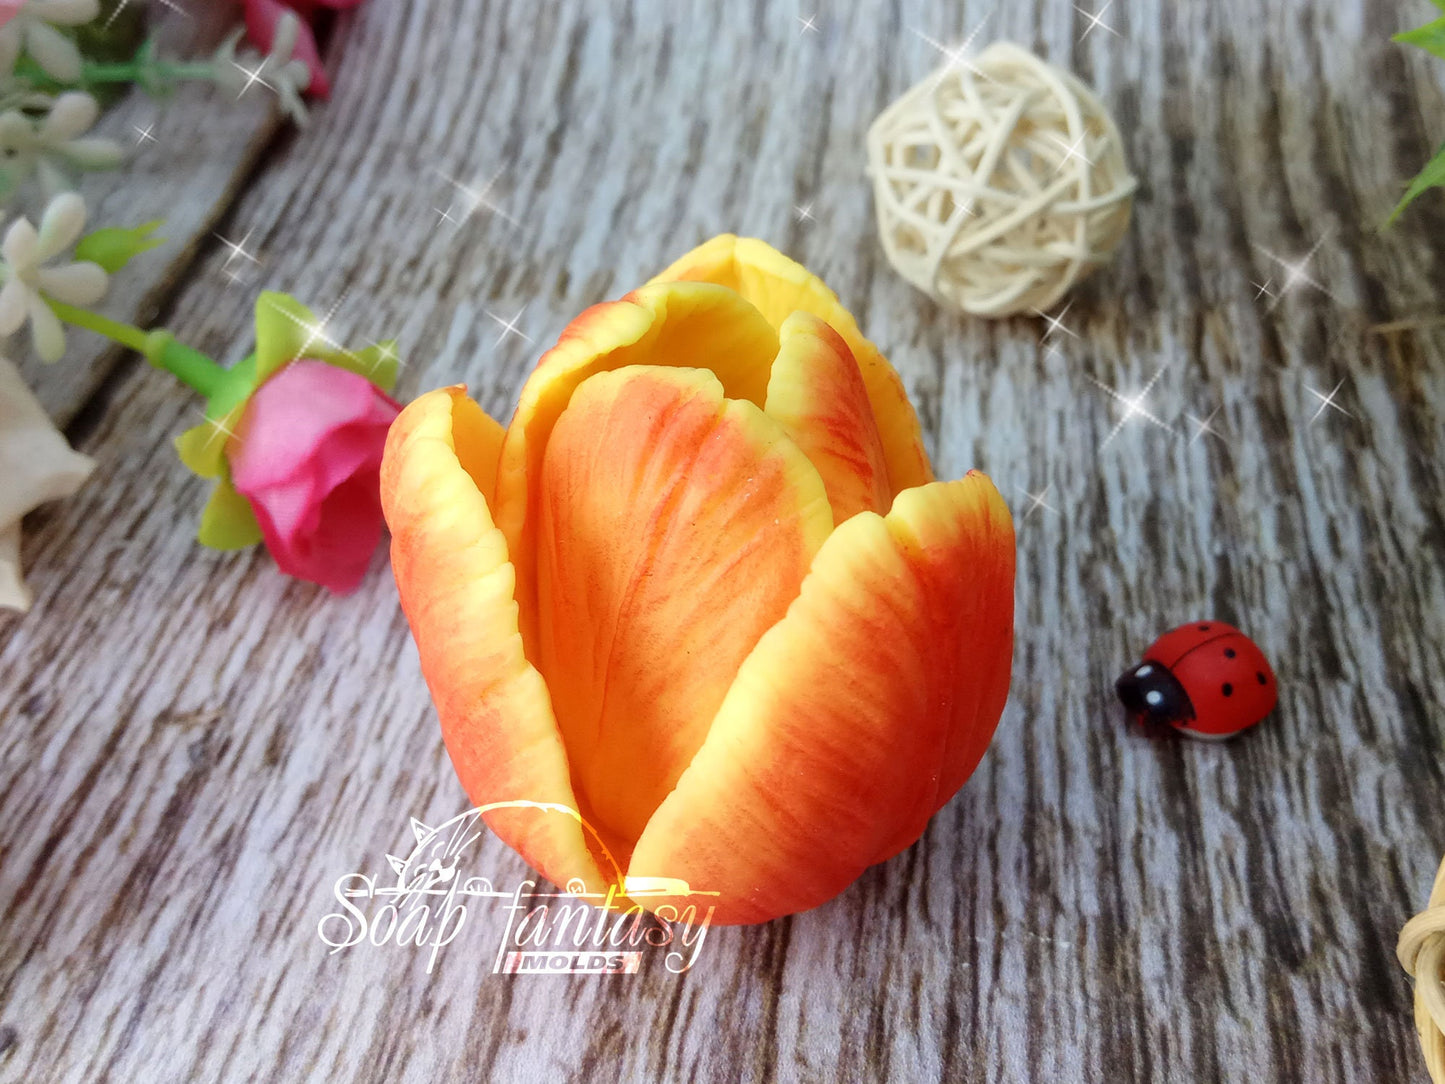 Tulip "Beauty" silicone mold for soap making